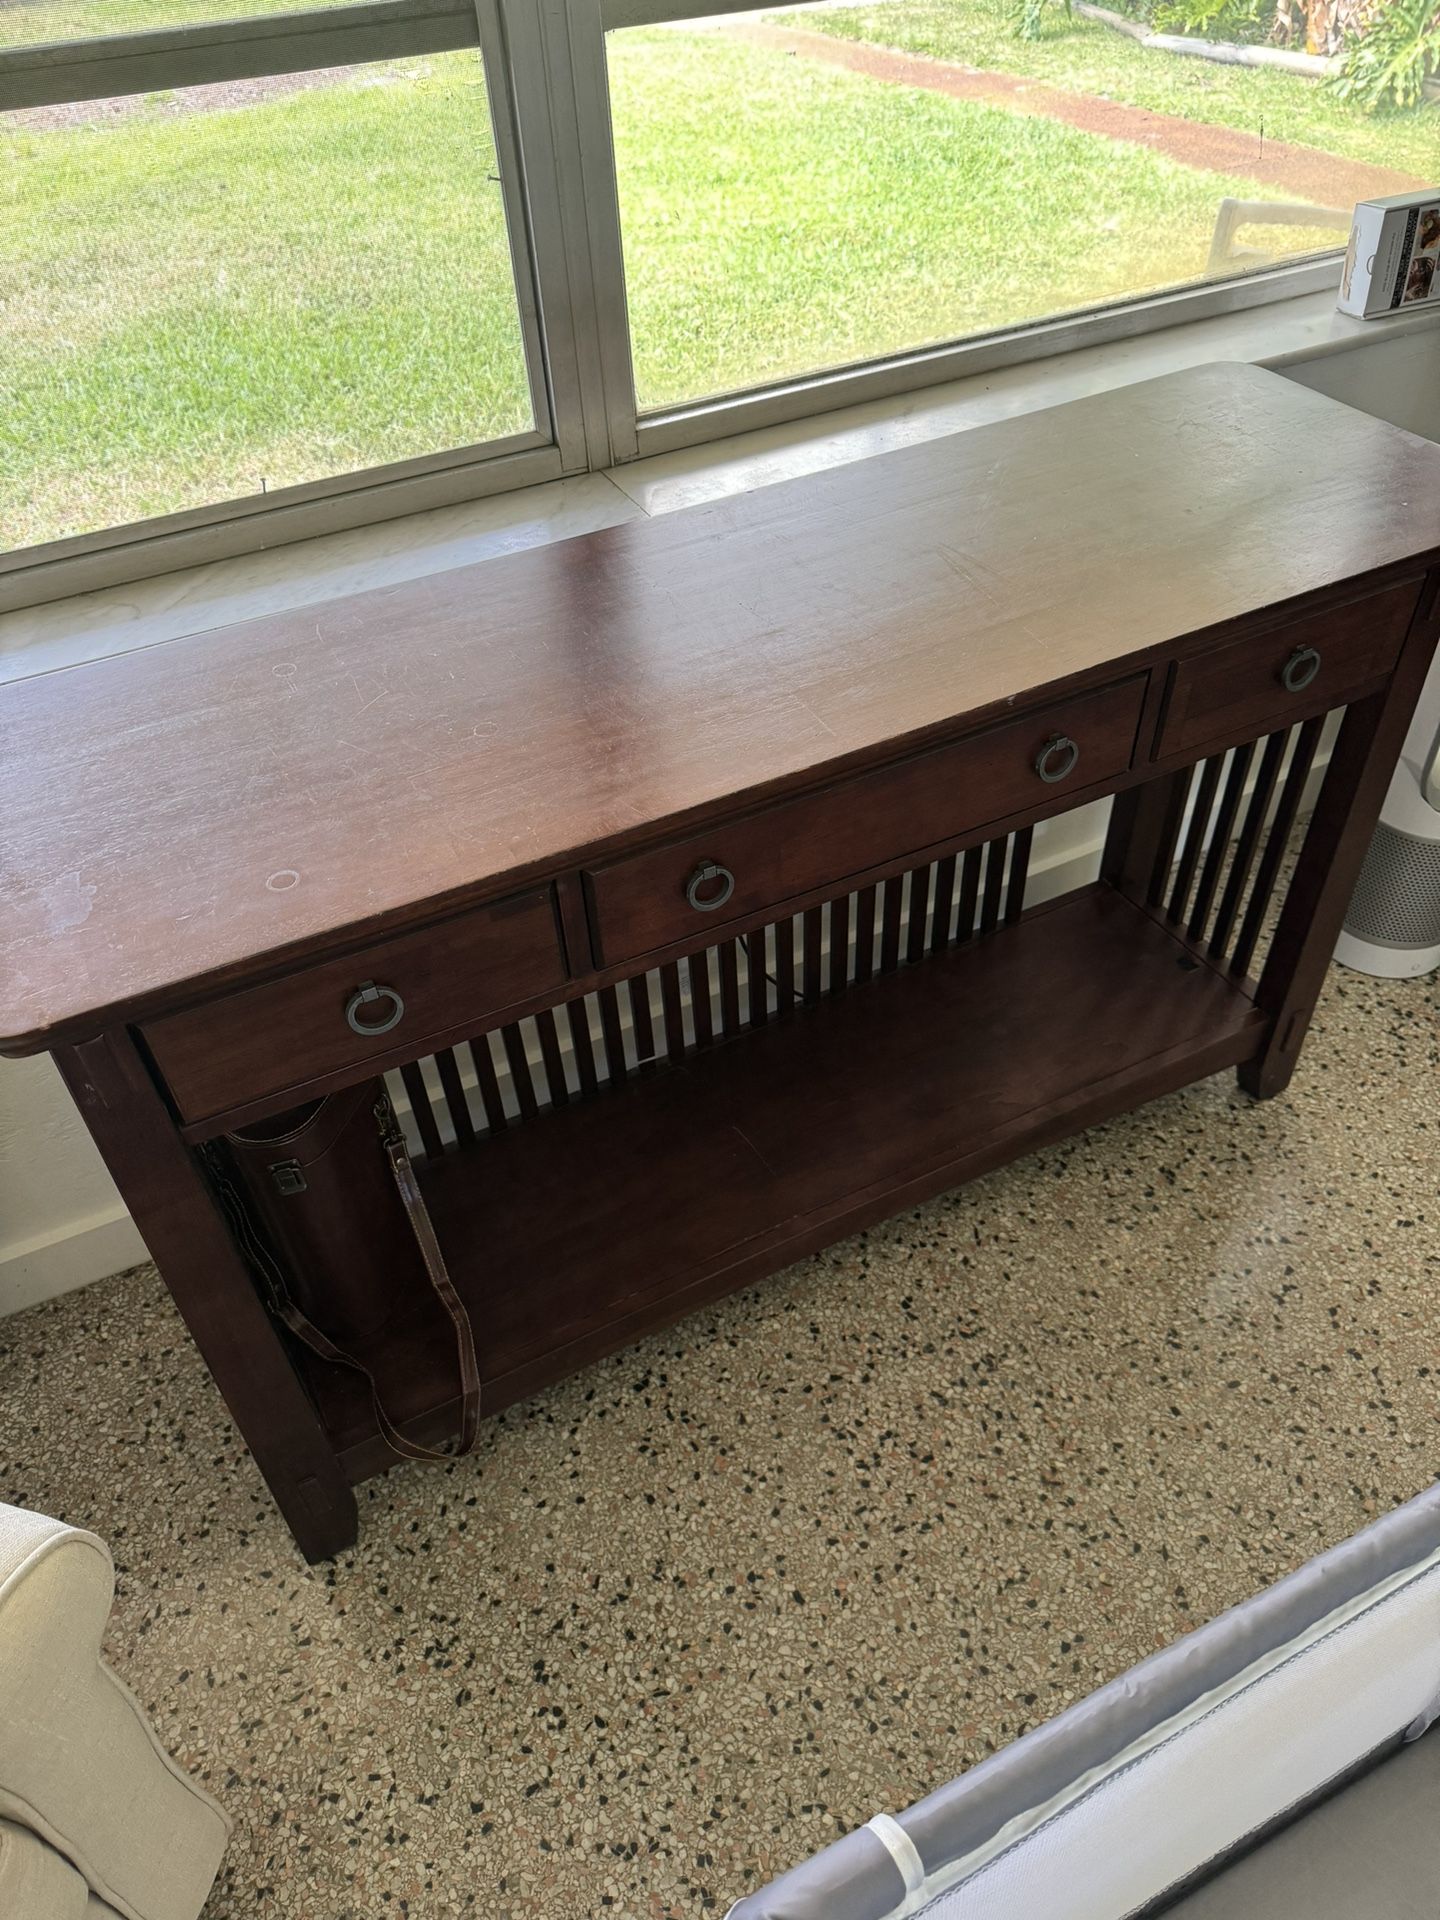 TV Stand / Entry Table 